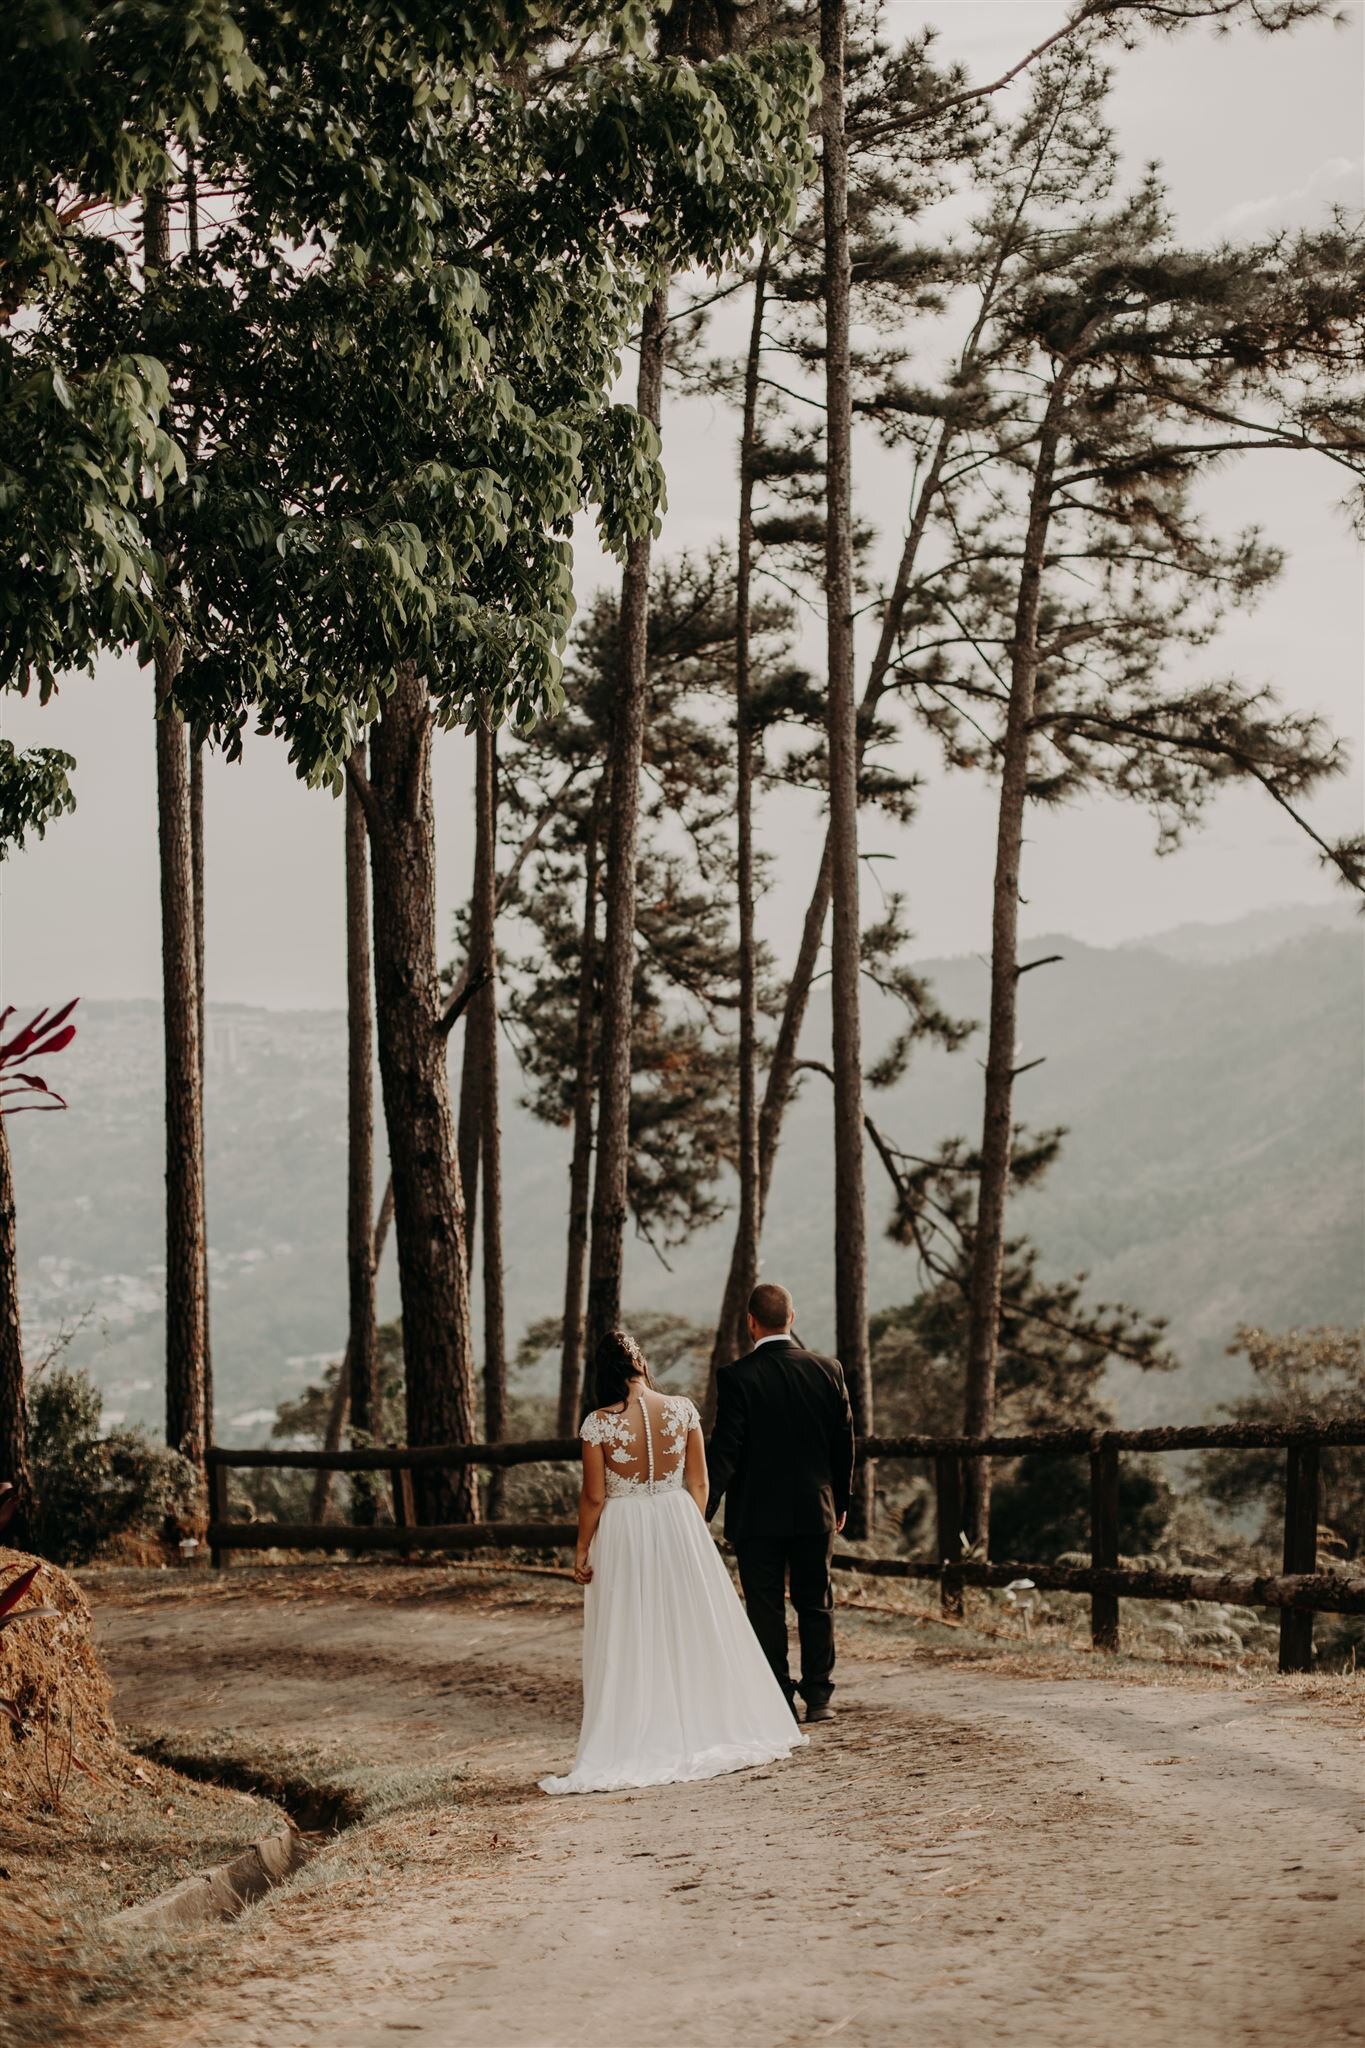 newlyweds walk down a dirt path together, hand in hand. bride and groom are both decked in their wedding attire. their surrounded by super tall trees with barely any leaves.